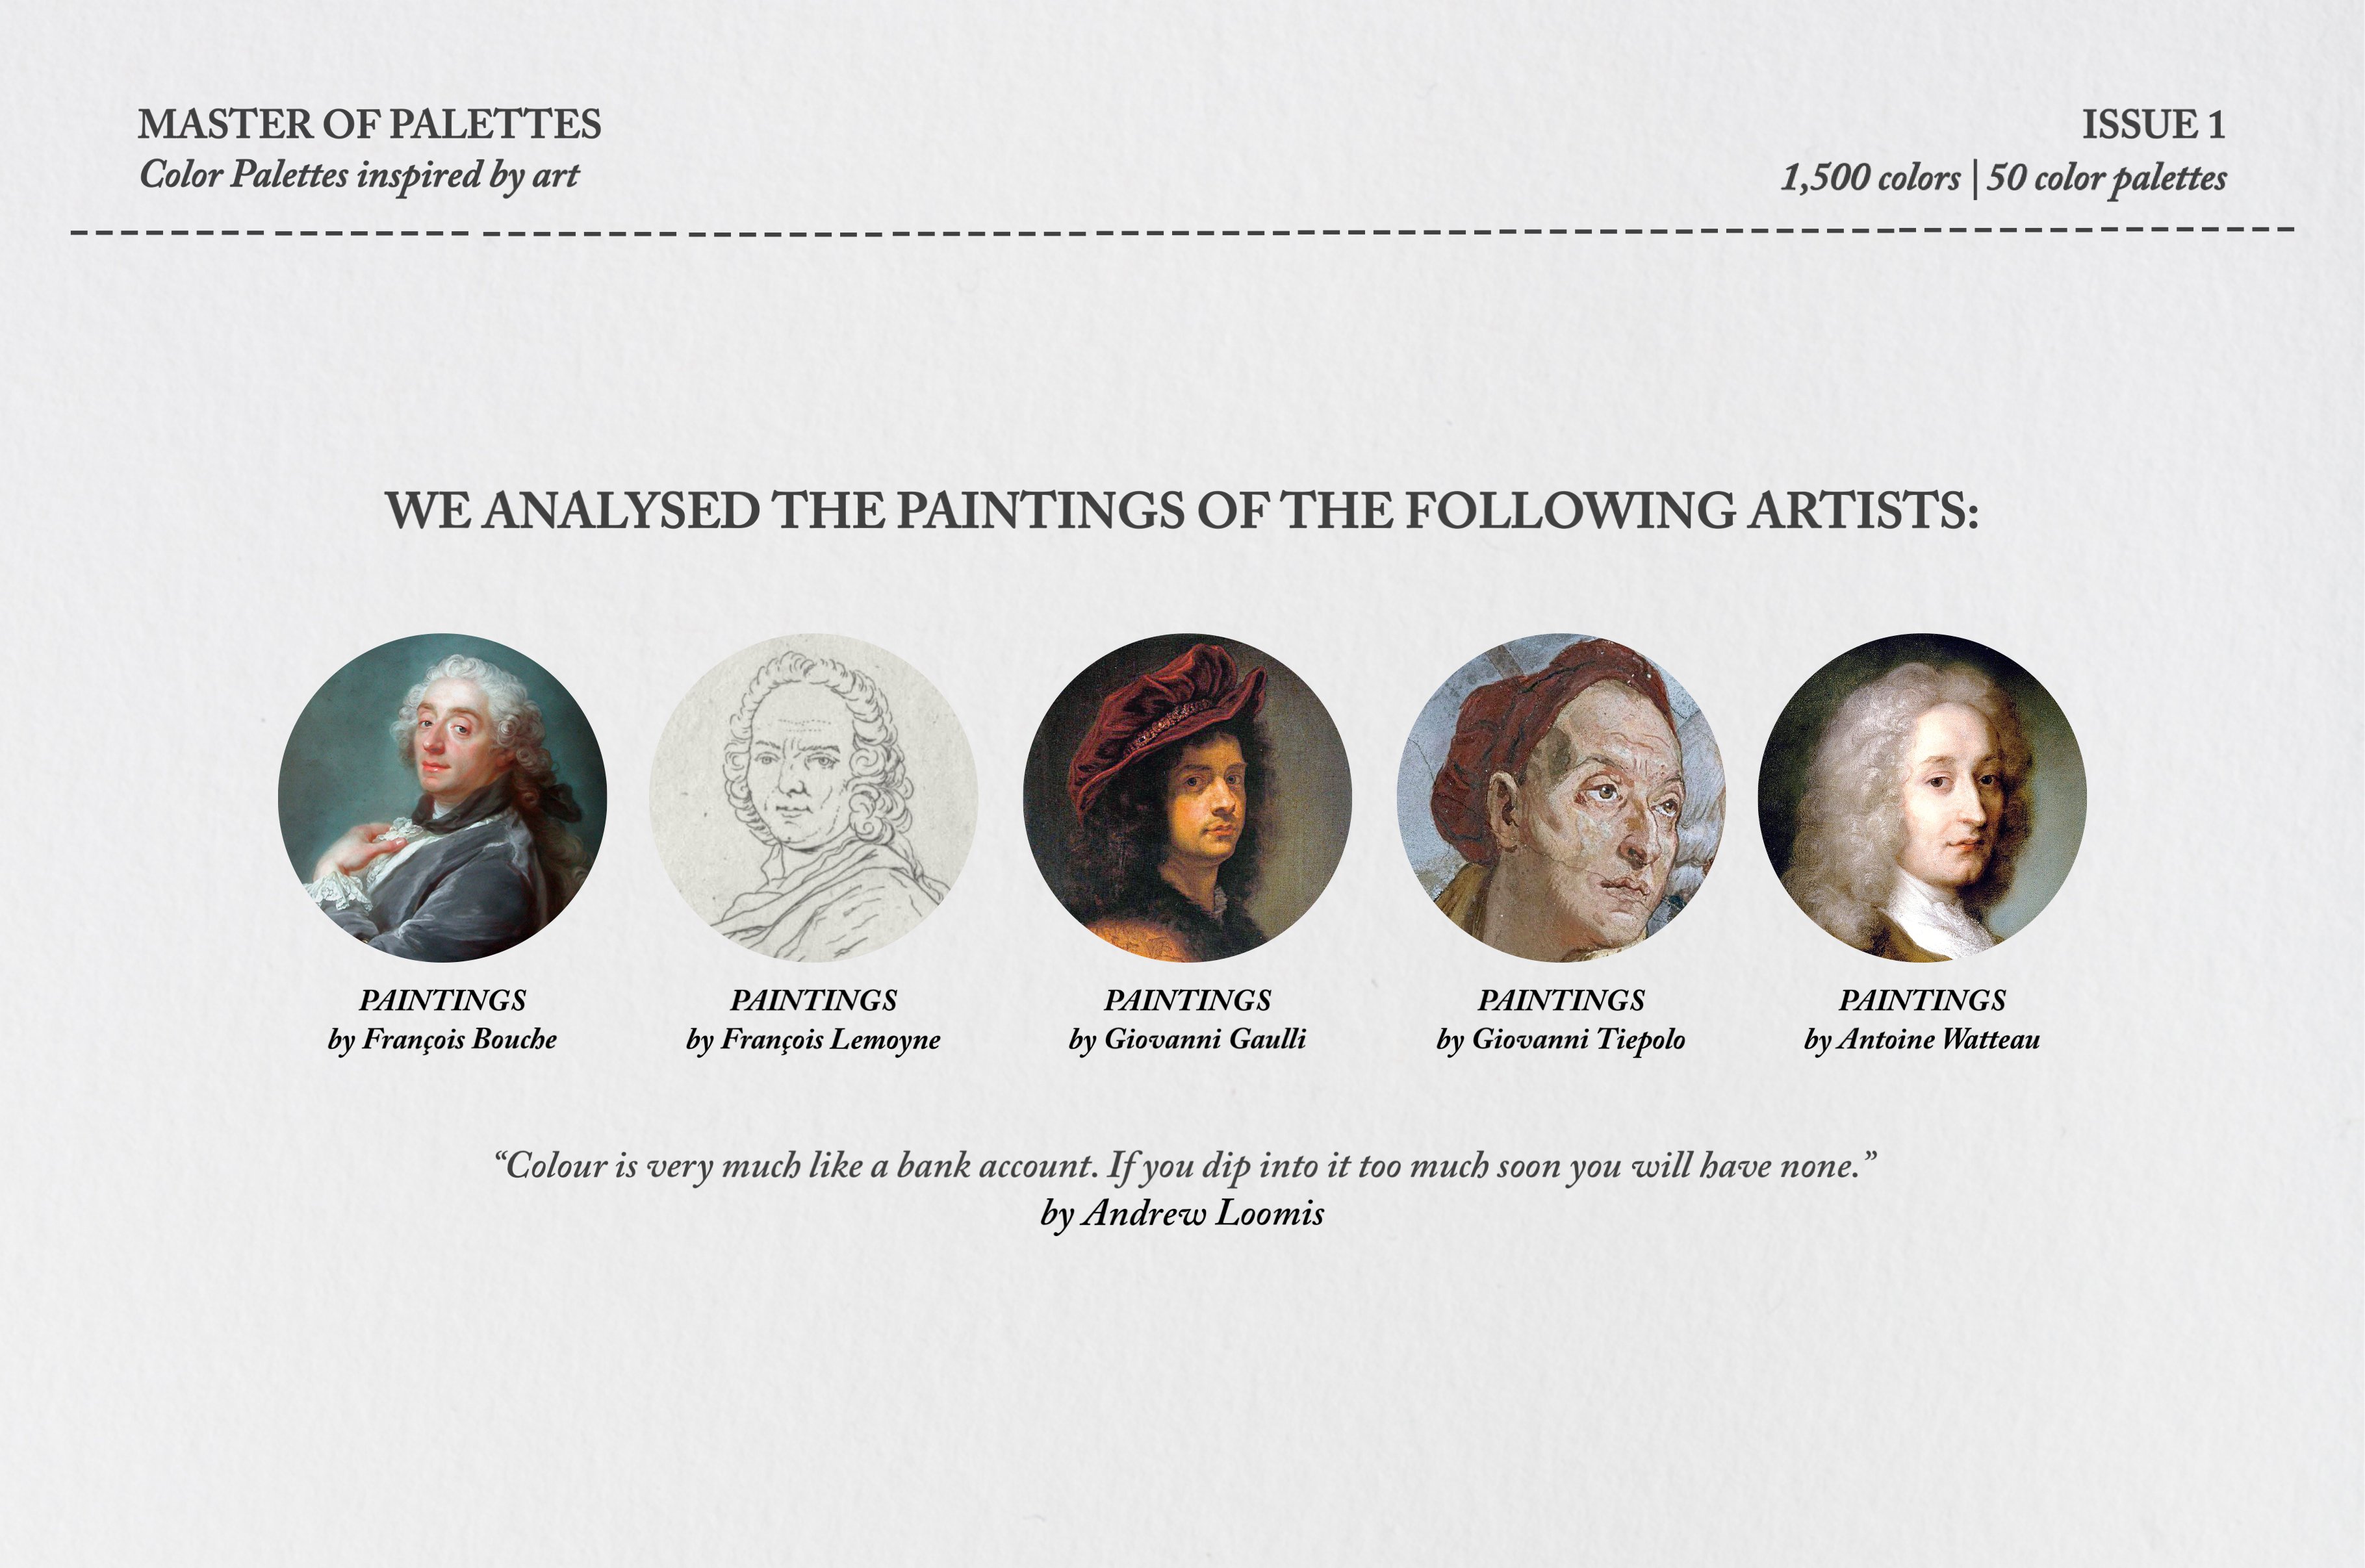 Some famous artists.